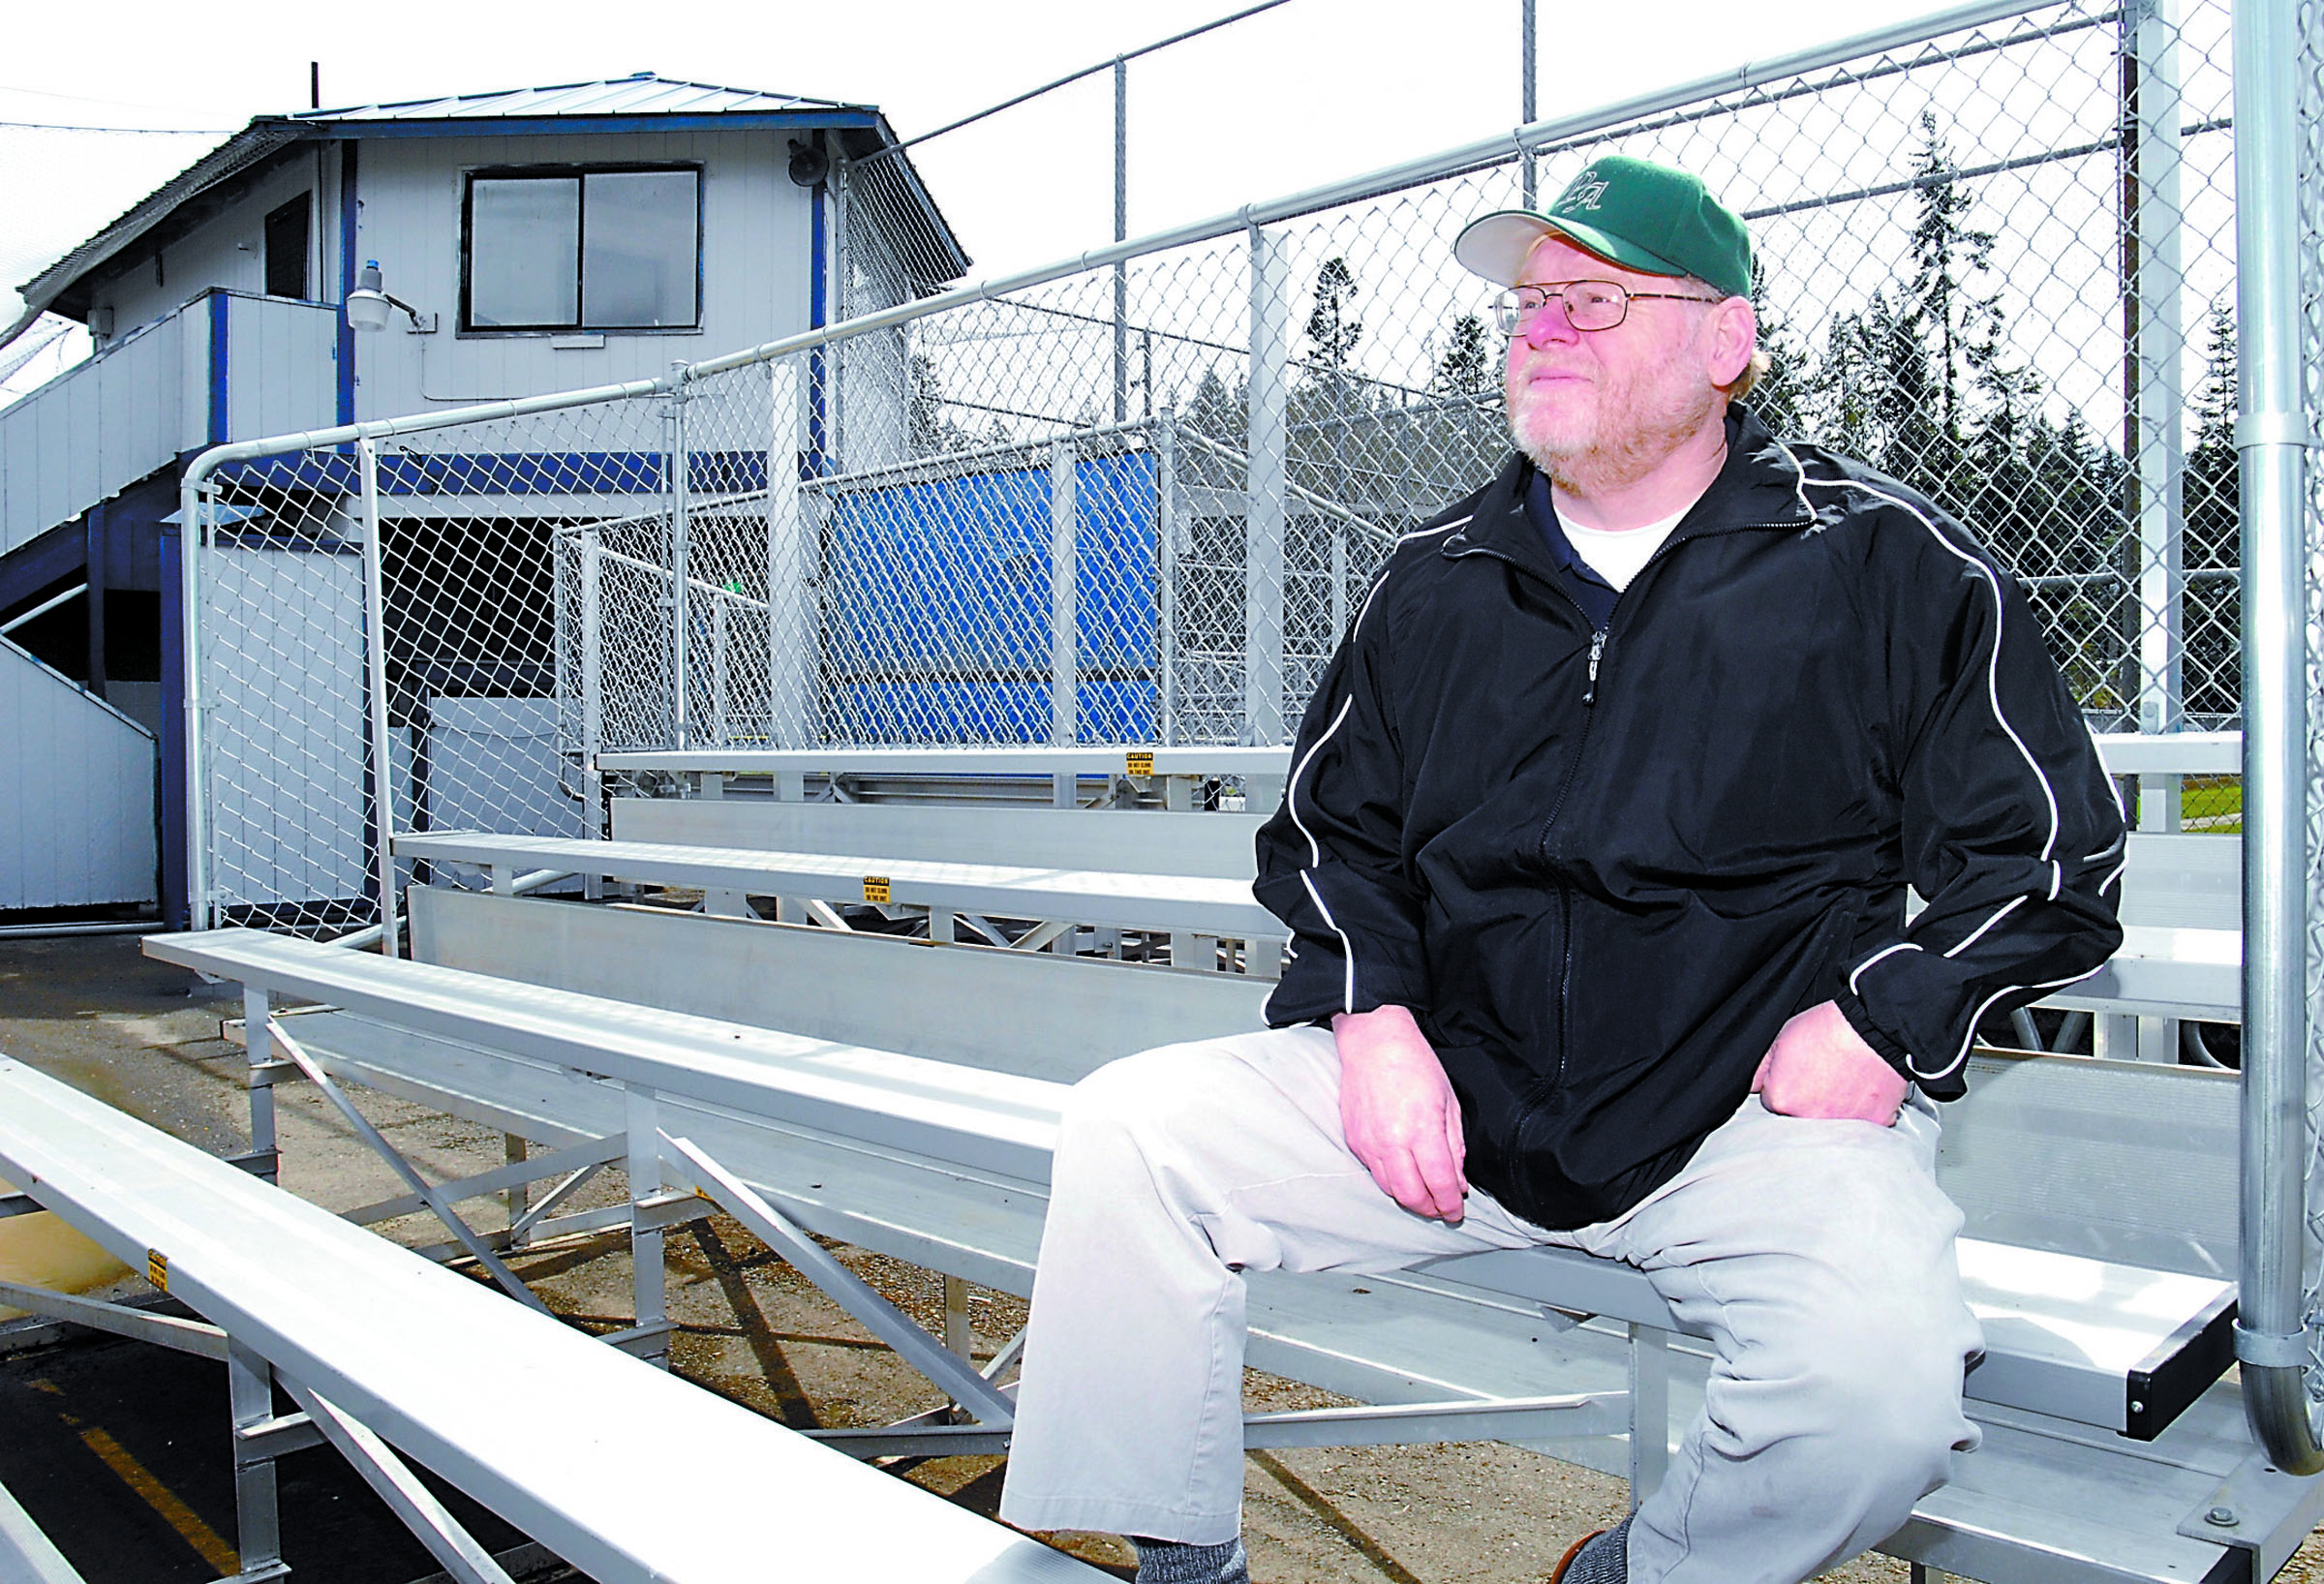 Longtime North Olympic Baseball and Softball president Jim Lunt looks out over a Lincoln Park playfield in 2009. Lunt died Monday at age 71. Keith Thorpe/Peninsula Daily News